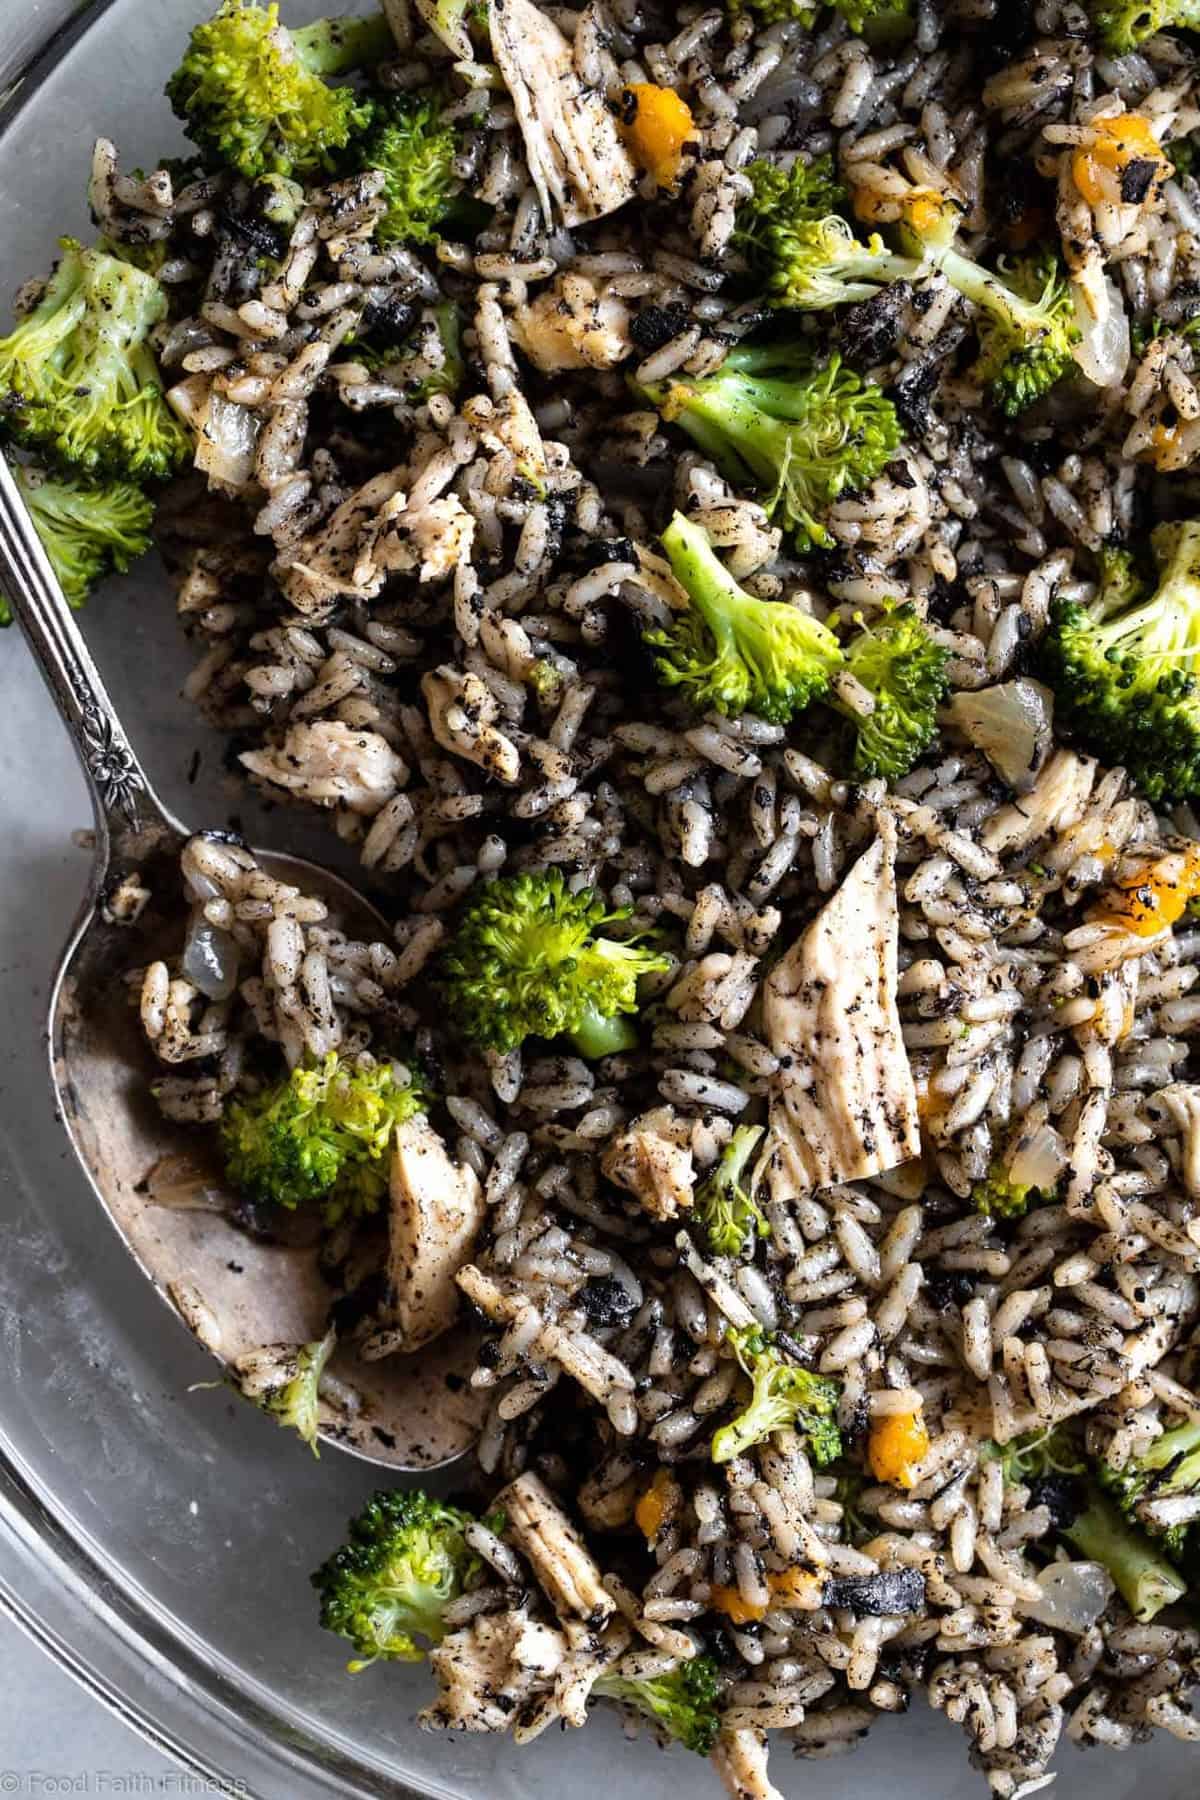 Instant Pot Broccoli Cheese and Chicken Rice Casserole - This gluten free Instant Pot chicken rice casserole with broccoli is an easy, weeknight dinner that almost makes itself! Even picky kids will love it and great for meal prep! | #Foodfaithfitness |